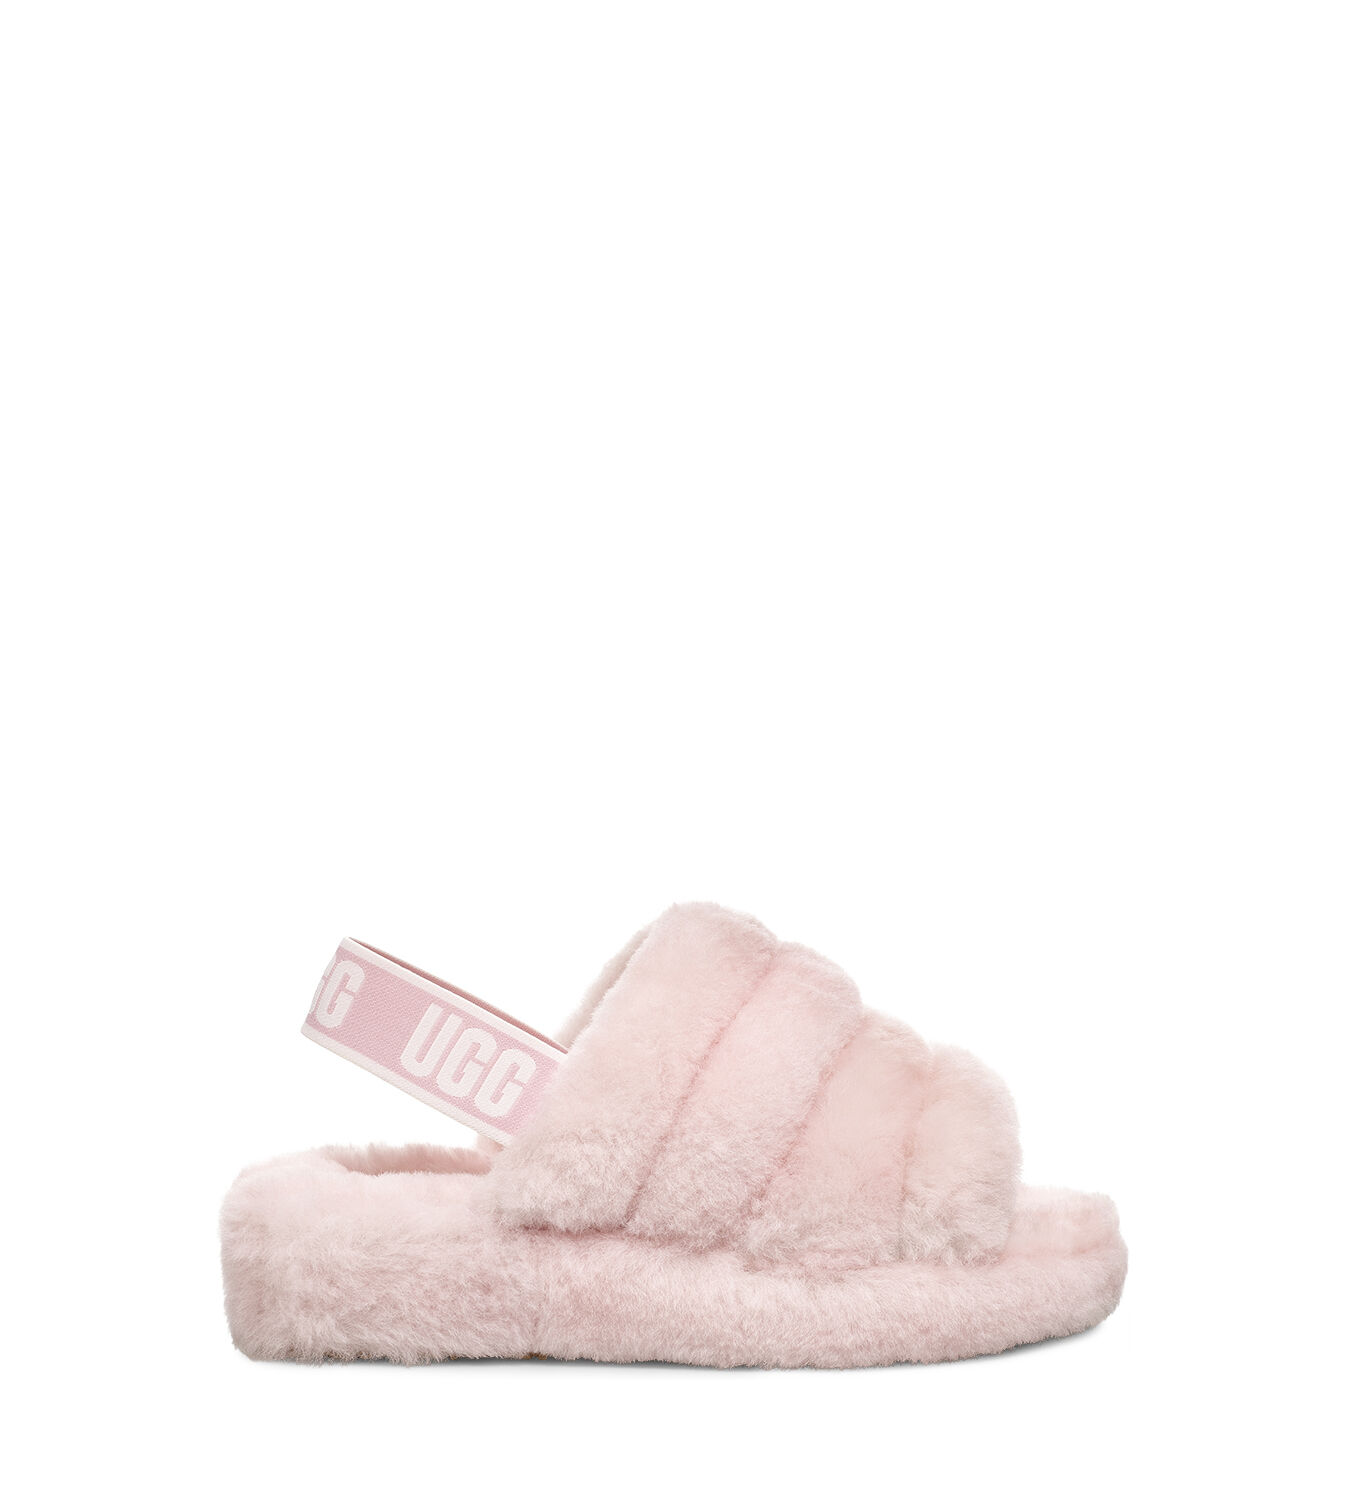 ugg pale pink scuffette slippers